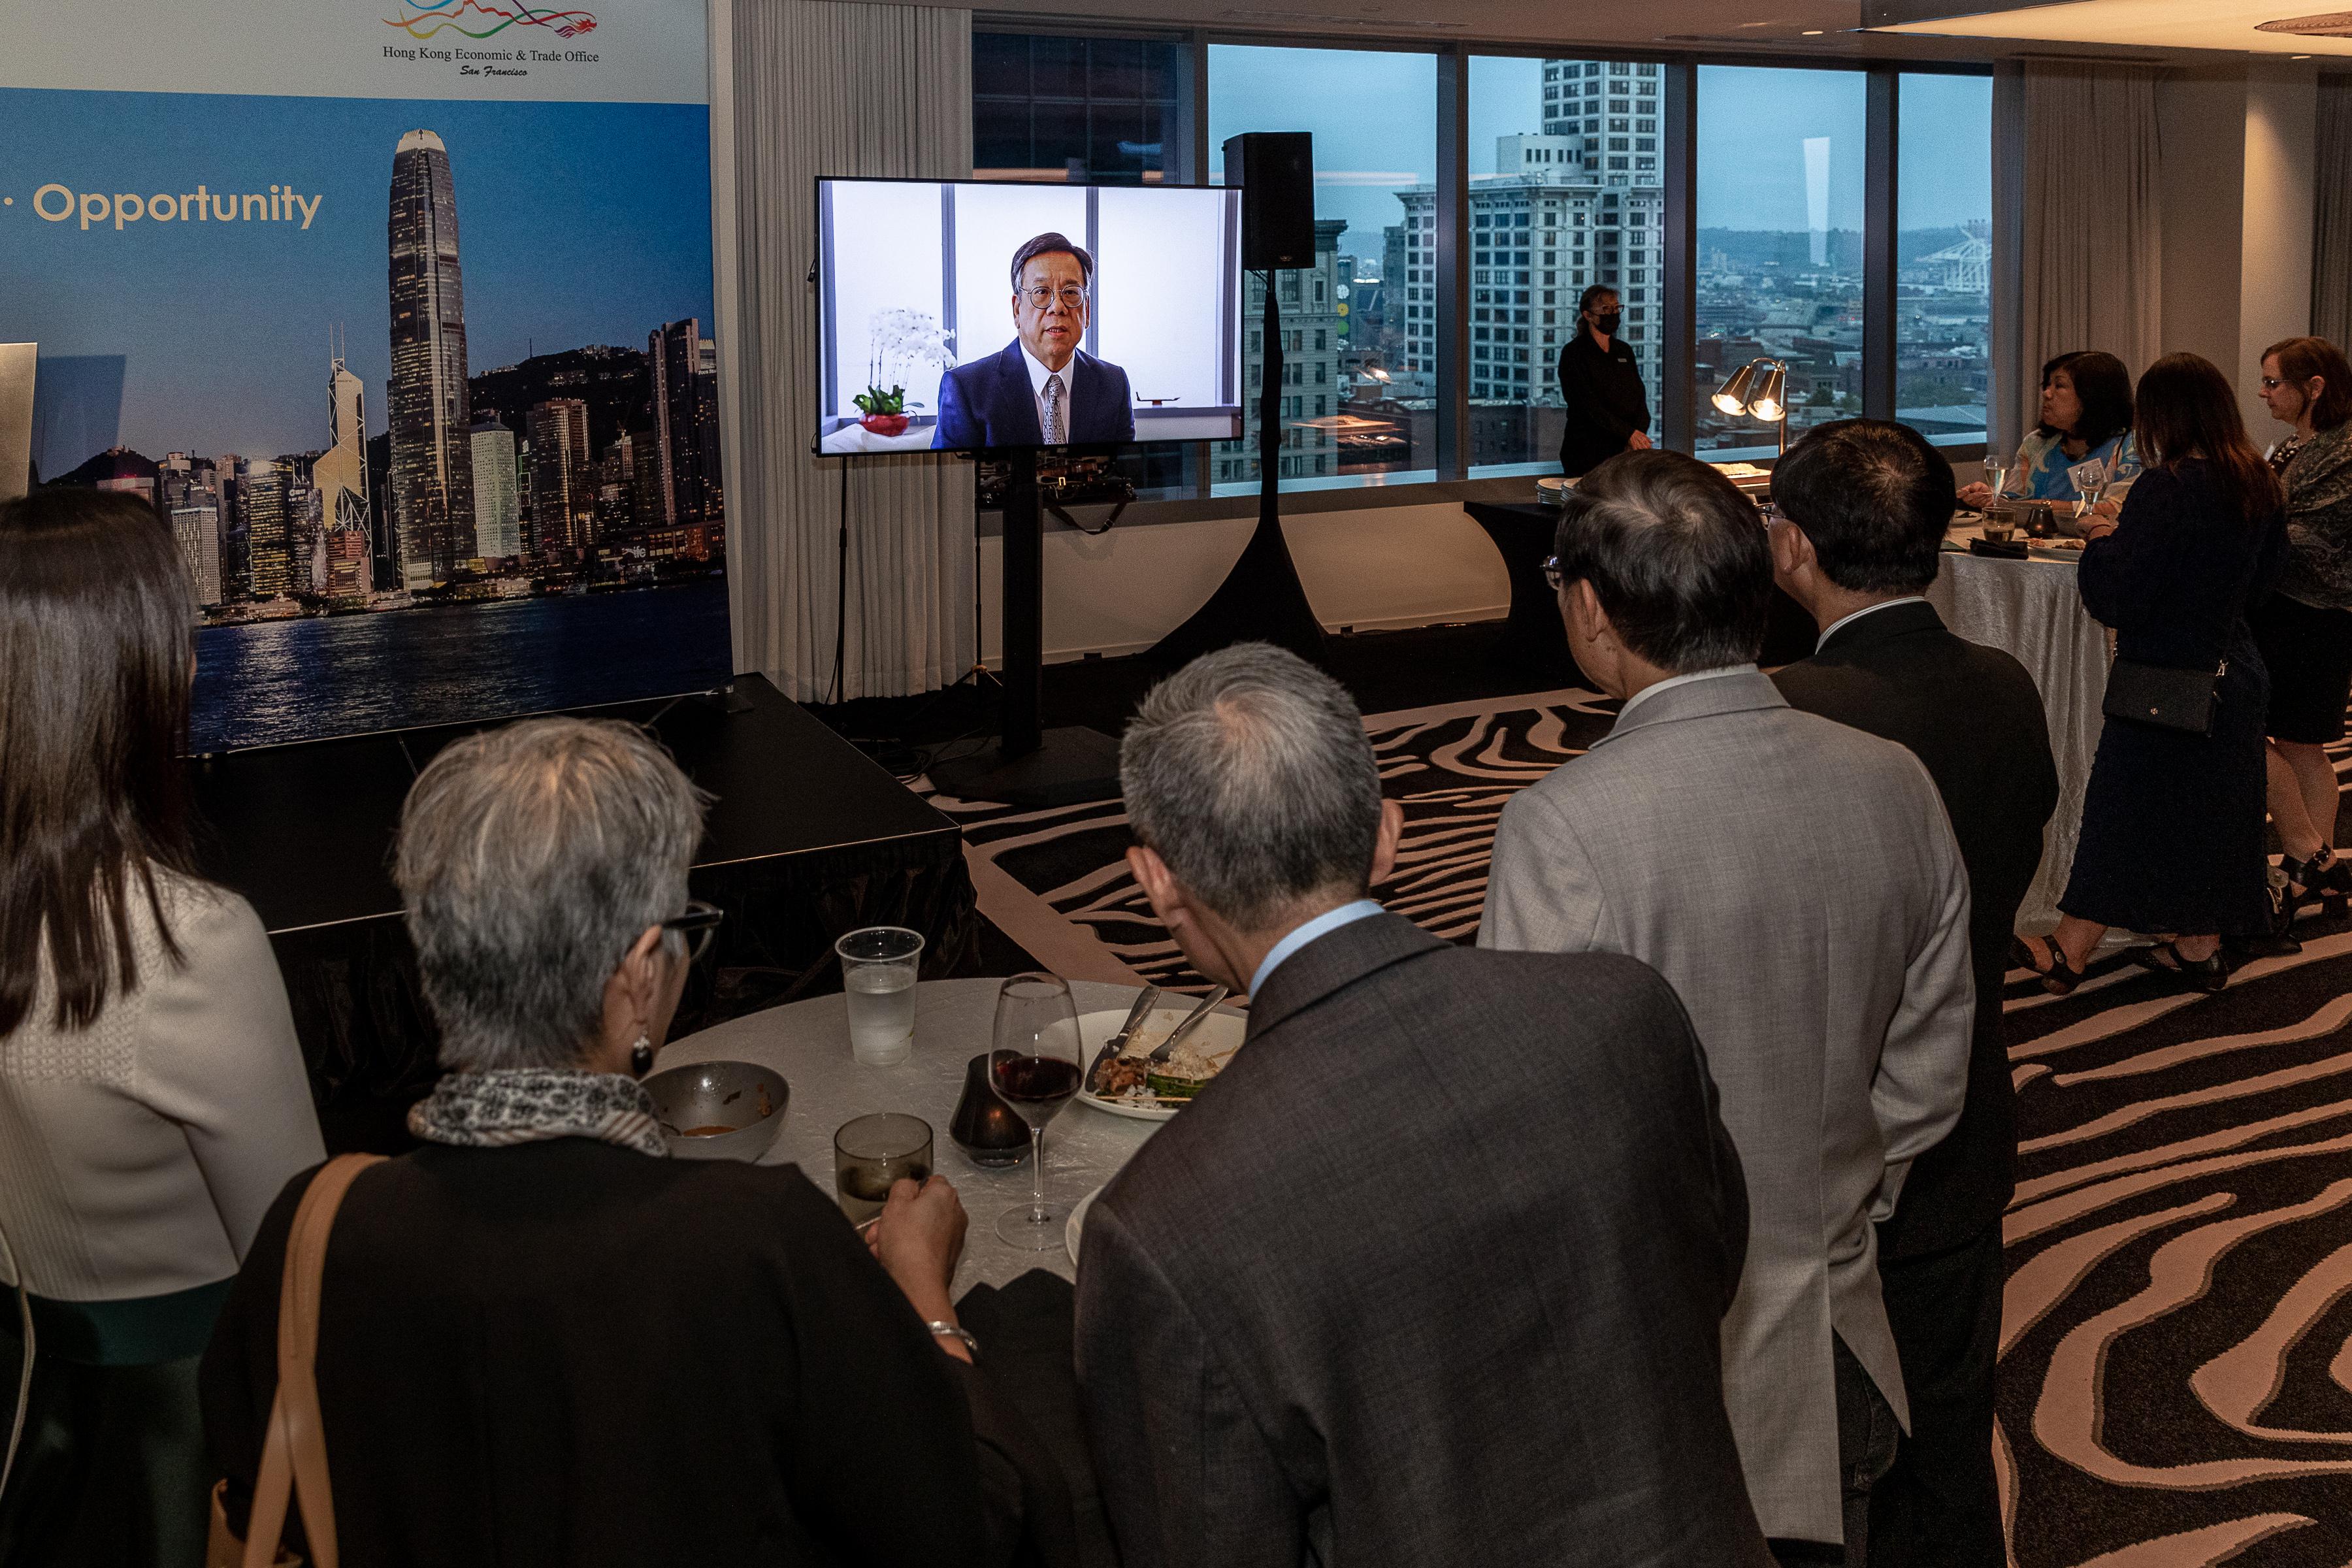 The Secretary for Commerce and Economic Development, Mr Algernon Yau, delivers a pre-recorded keynote speech at a reception celebrating the 25th anniversary of the establishment of the Hong Kong Special Administrative Region in Seattle, Washington, on September 15 (Seattle time).